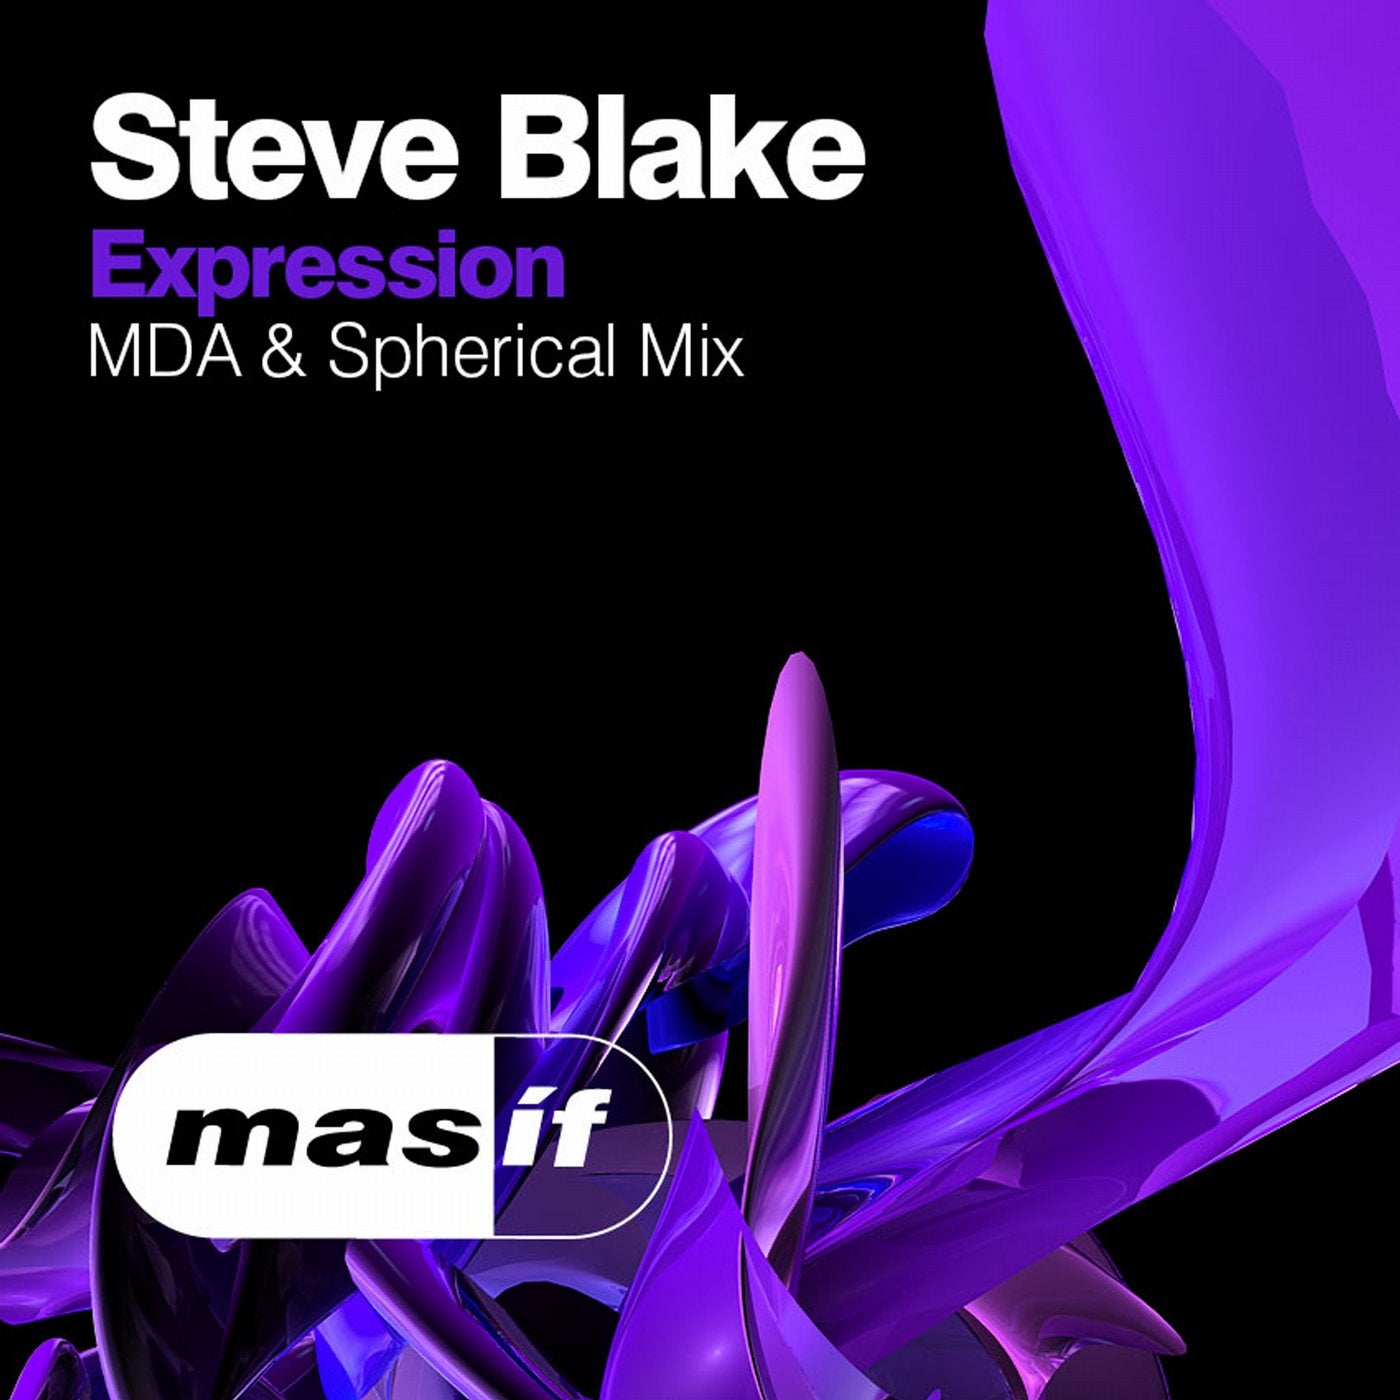 Expression (MDA & Spherical Mix)